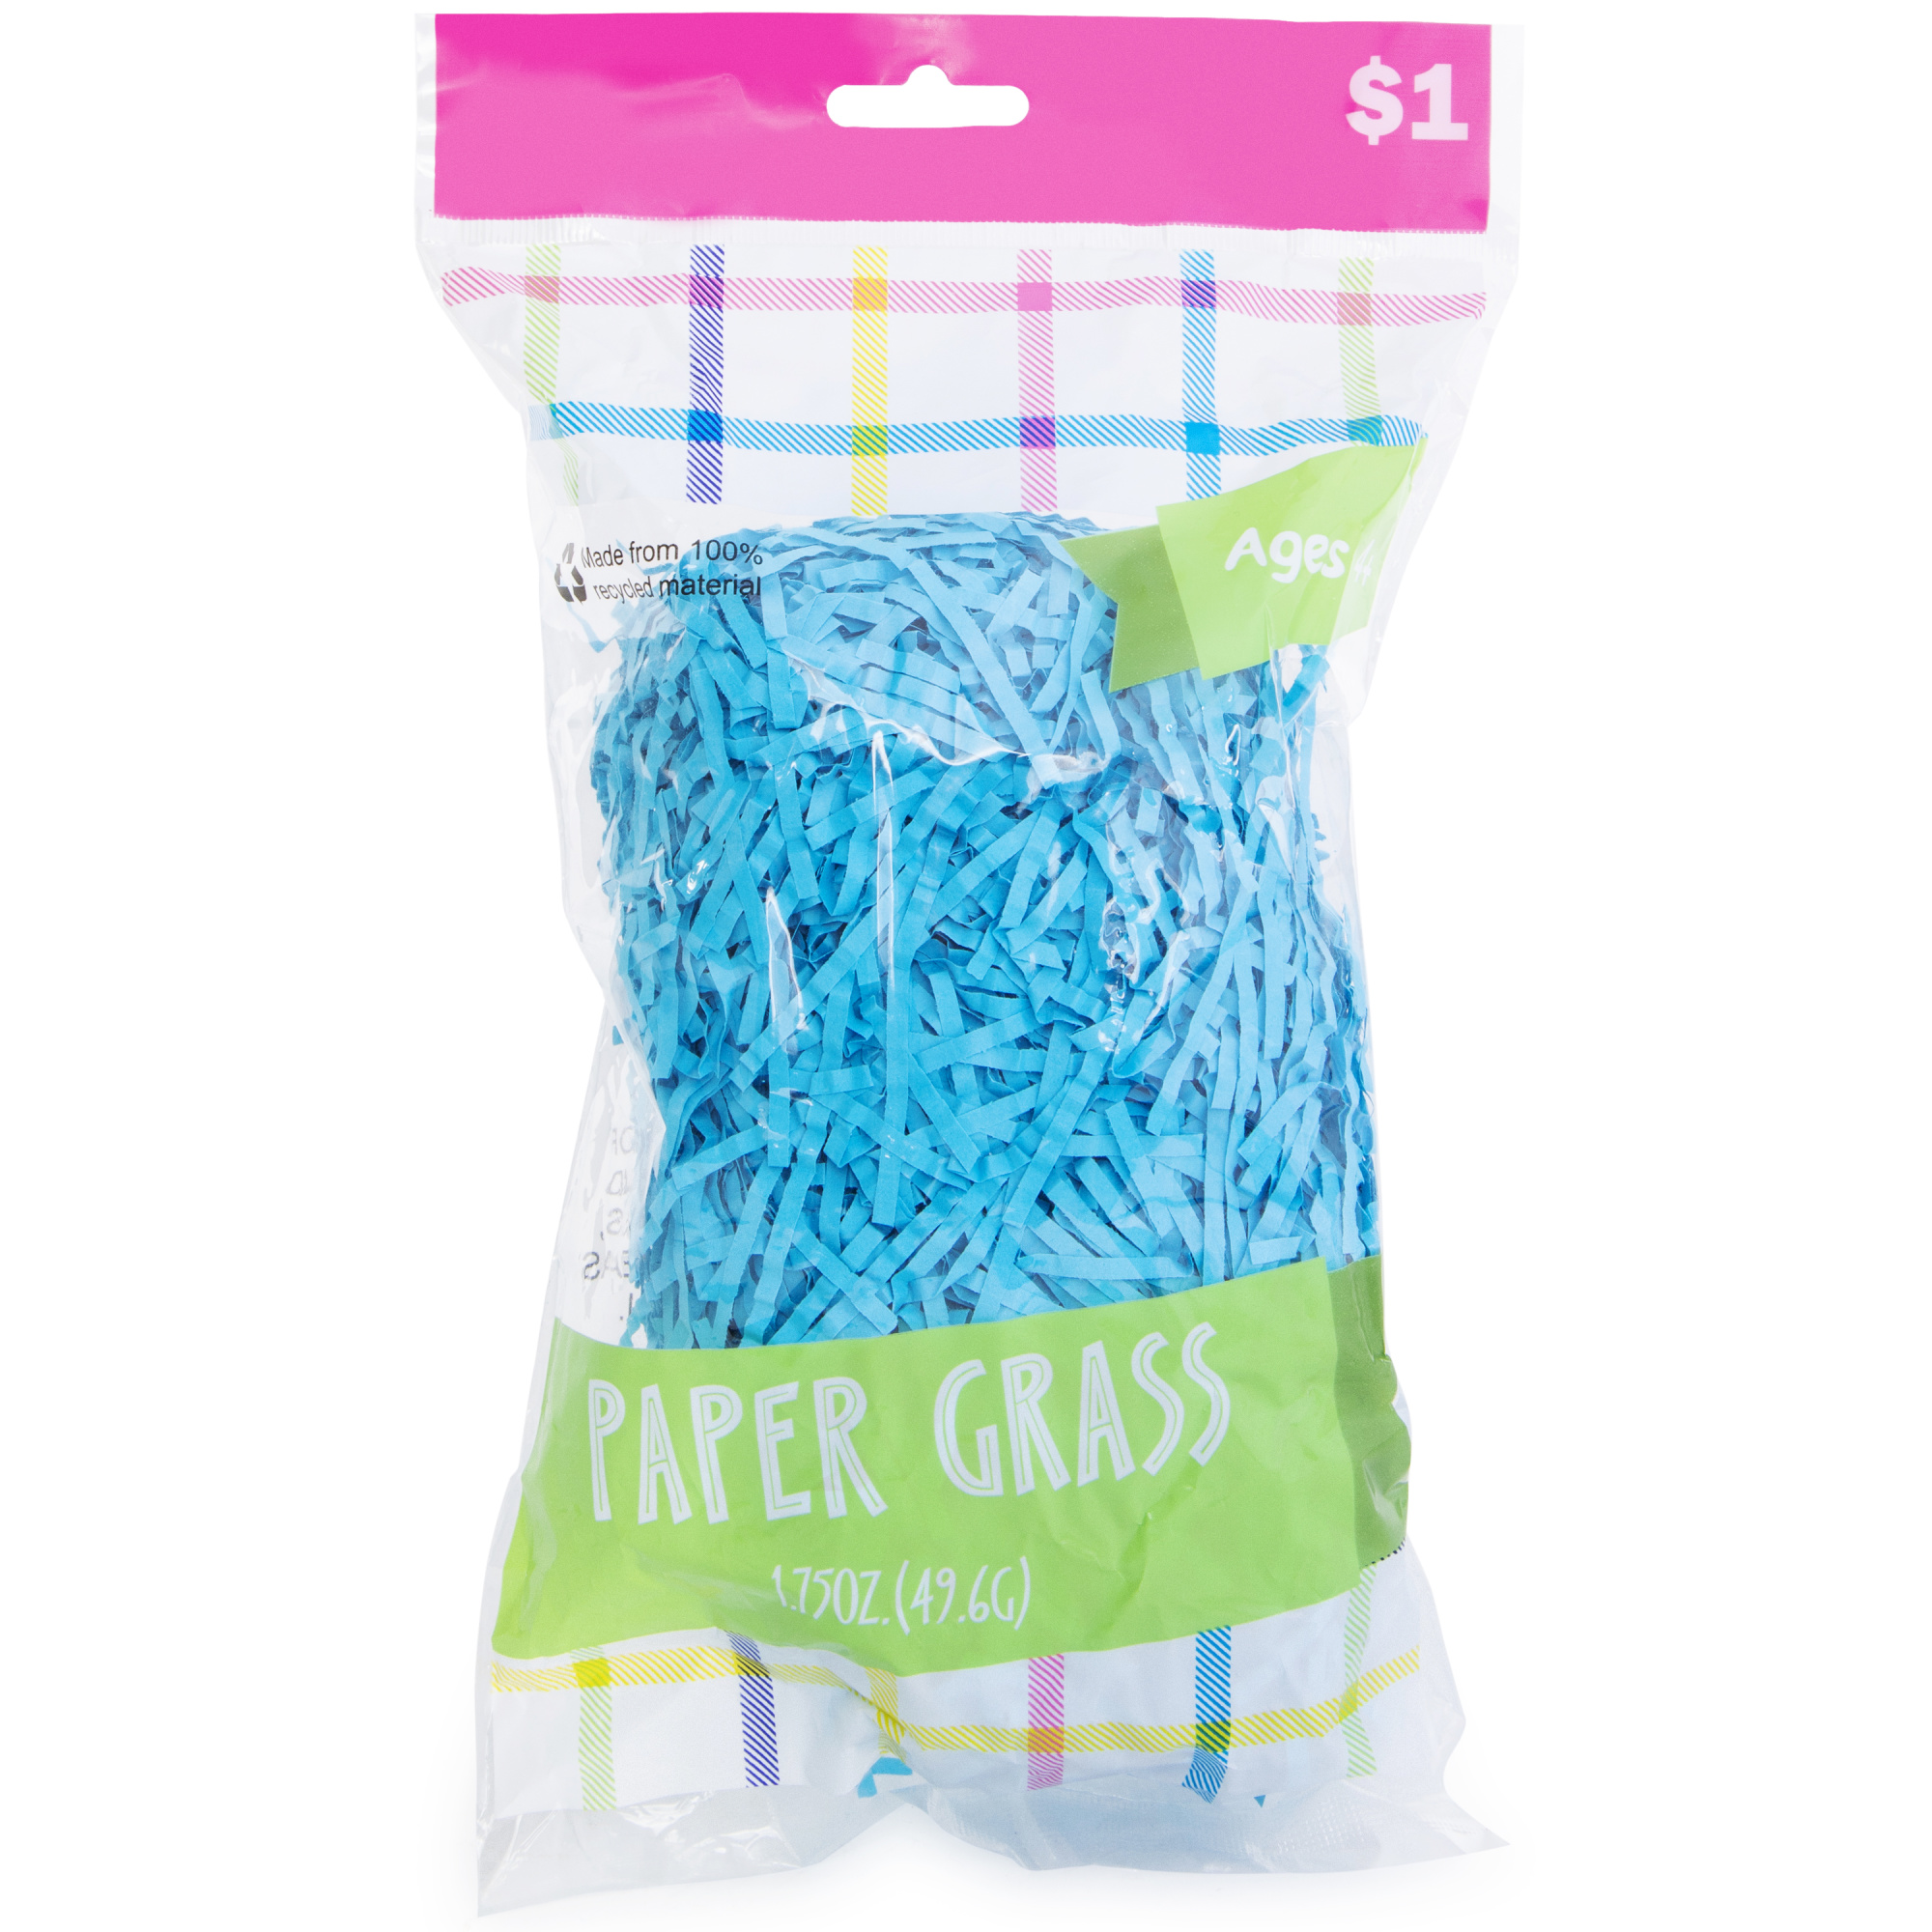 Colorful Recycled Paper Easter Grass 1.75oz